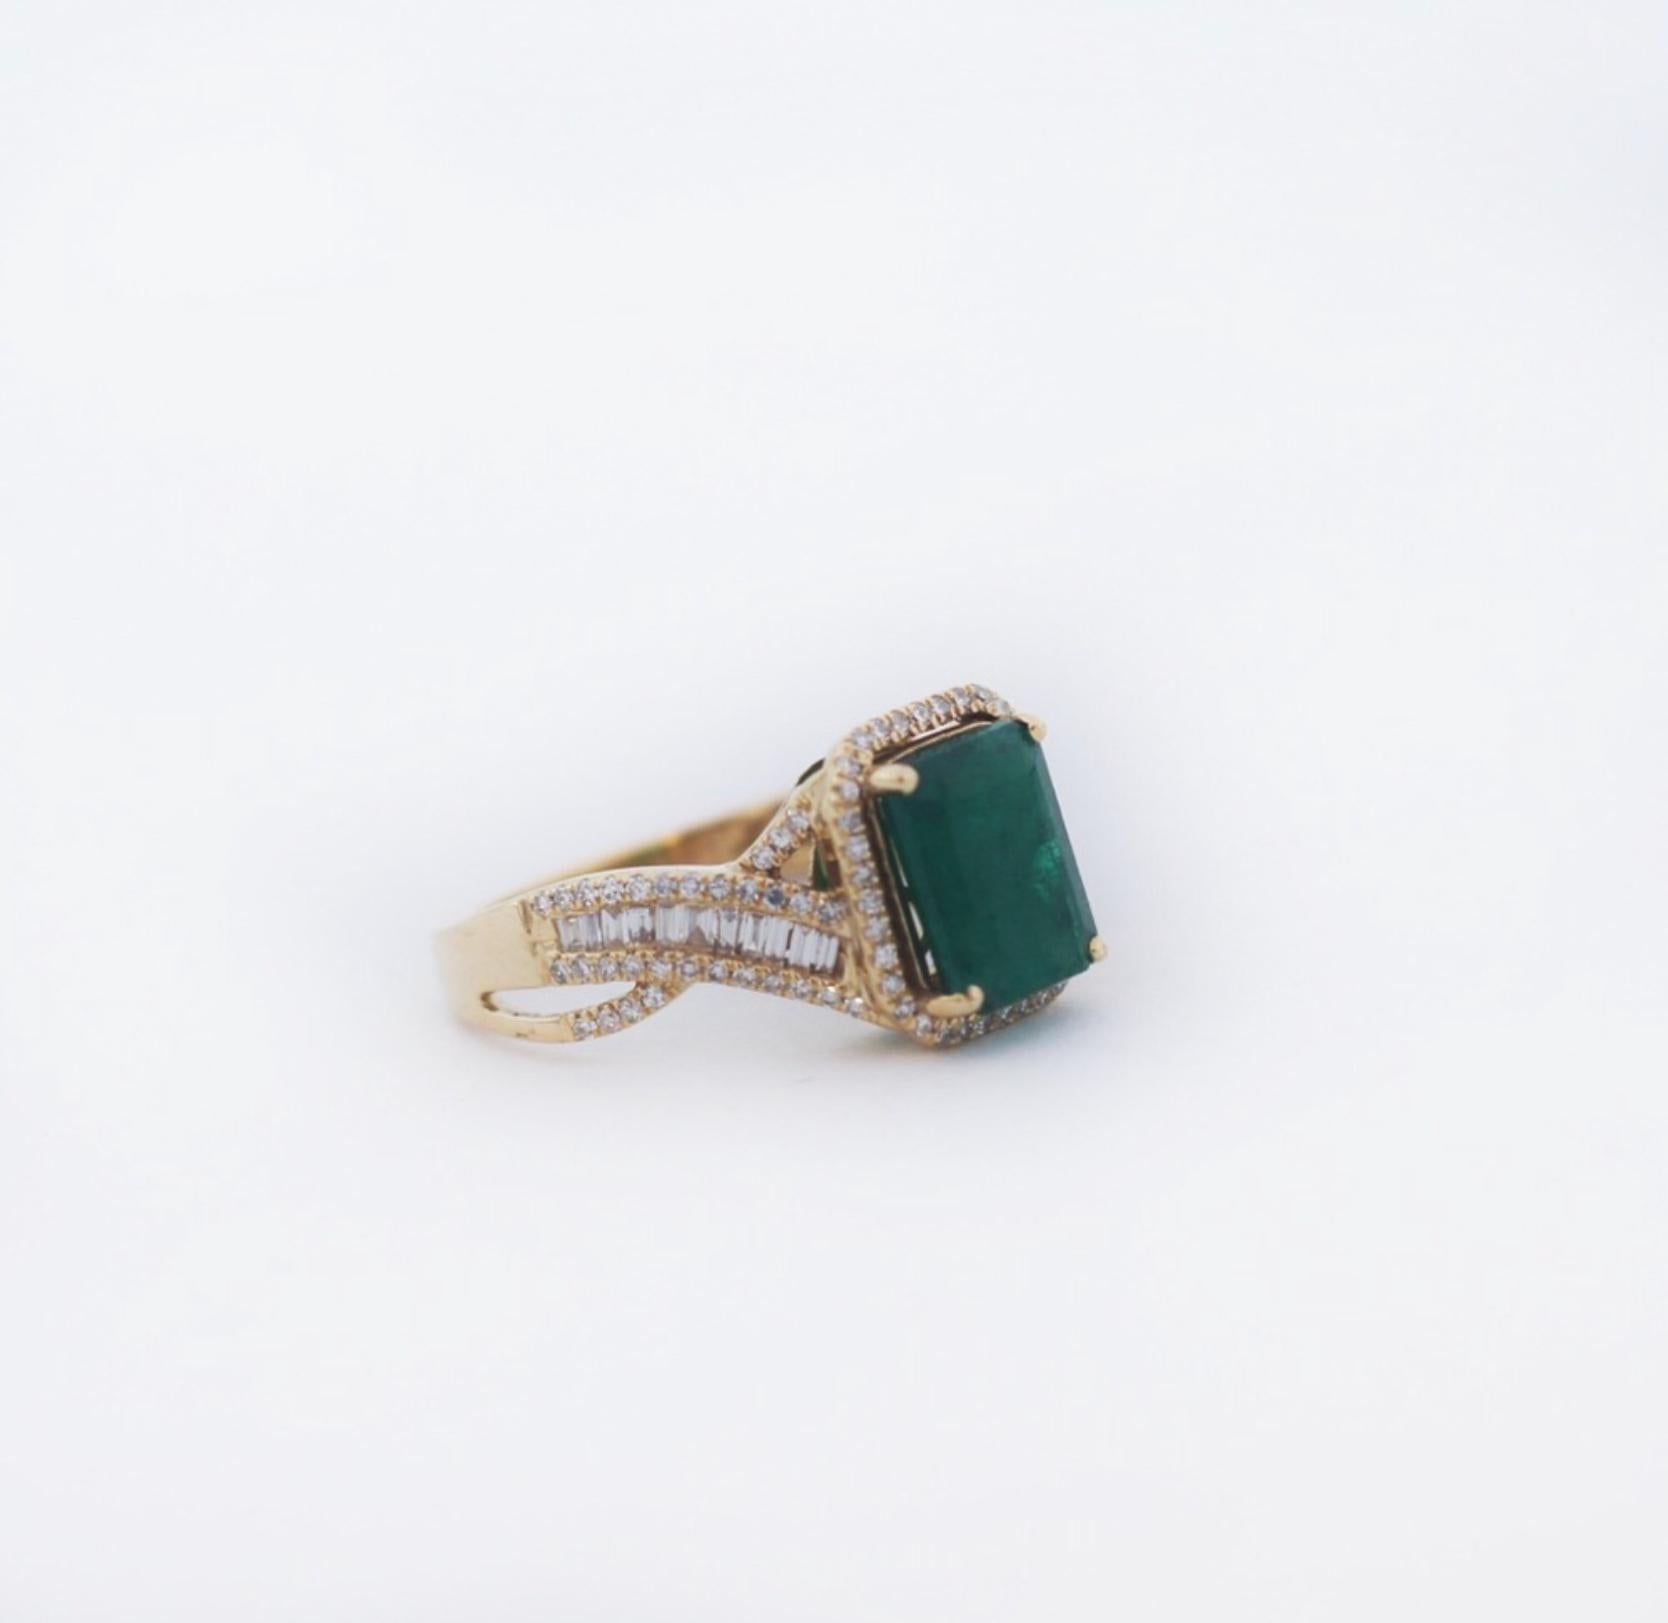 Brand: EFFY
Material: 14K Gold
Ring Size: 7
Hallmarks: EFFY 14K
Approx. Total Weight: 4.50 grams
PRIMARY STONE
Type: Emerald
Shape: Cut Cornered Rectangular Faceted
SECONDARY STONE
Type: Diamonds
Shape: Single Cut round and Baguette
This beautiful